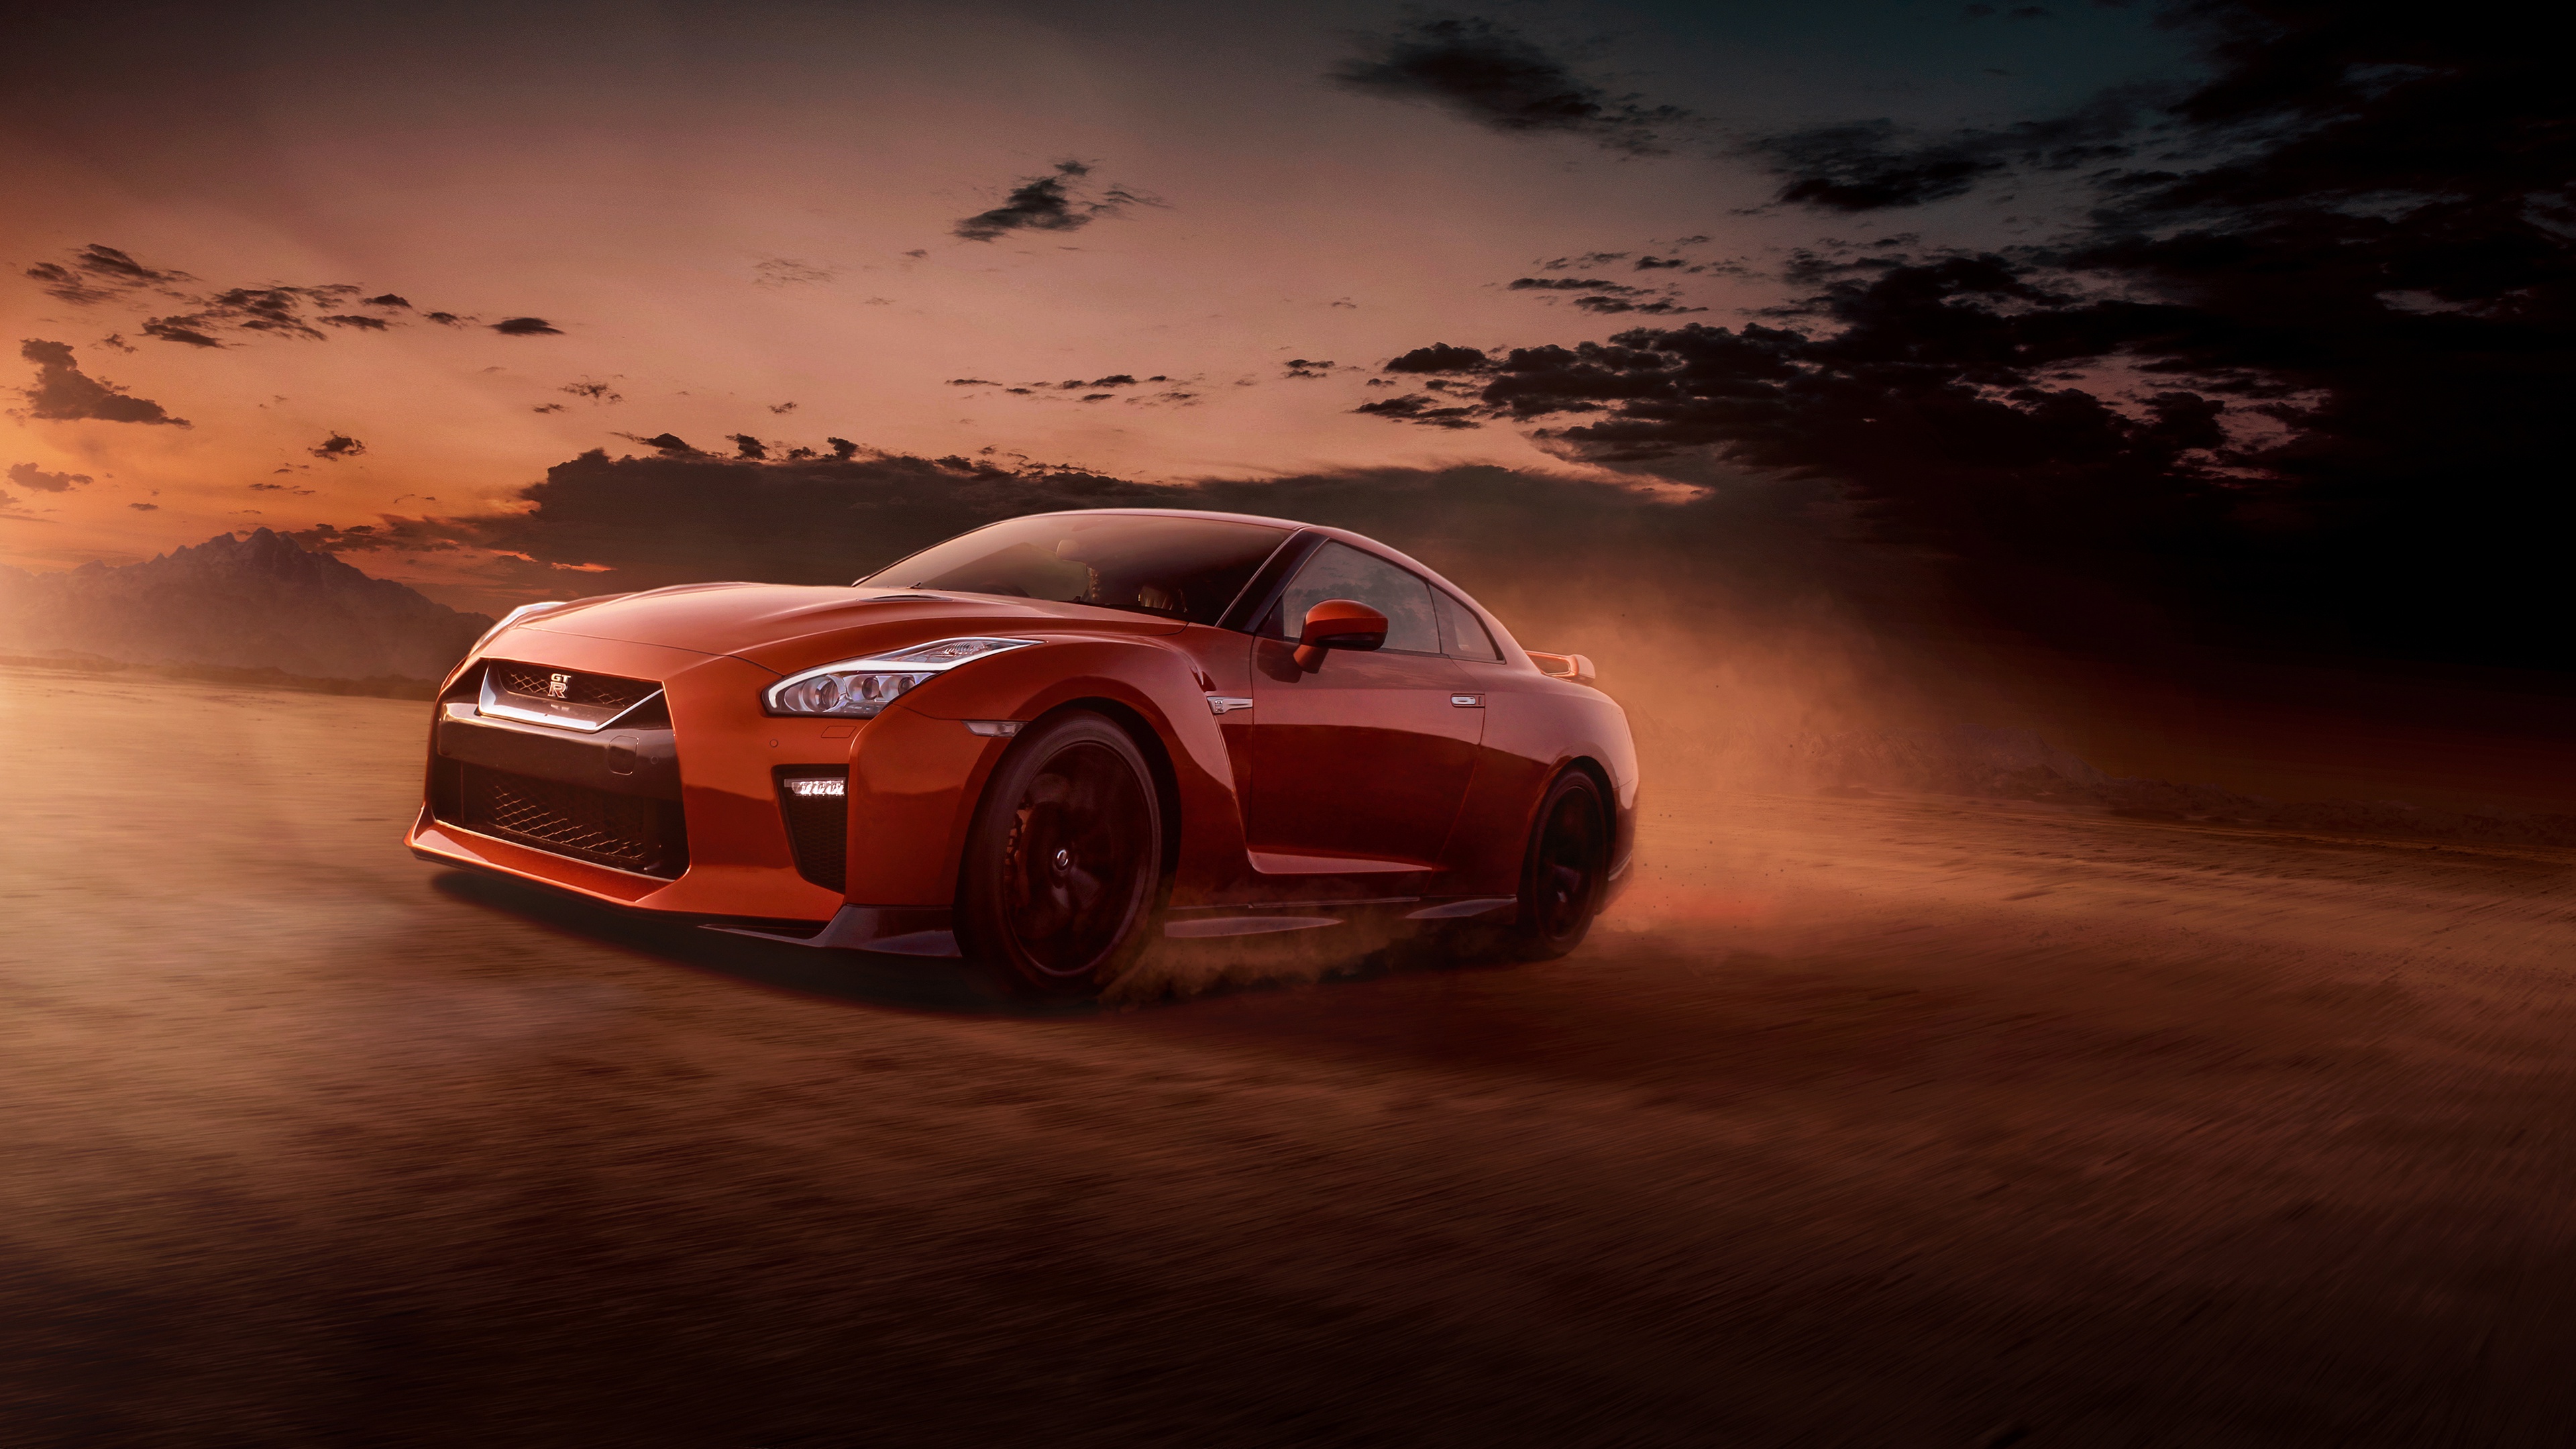 Red Nissan GTR Background Wallpaper 71685 3840x2160px